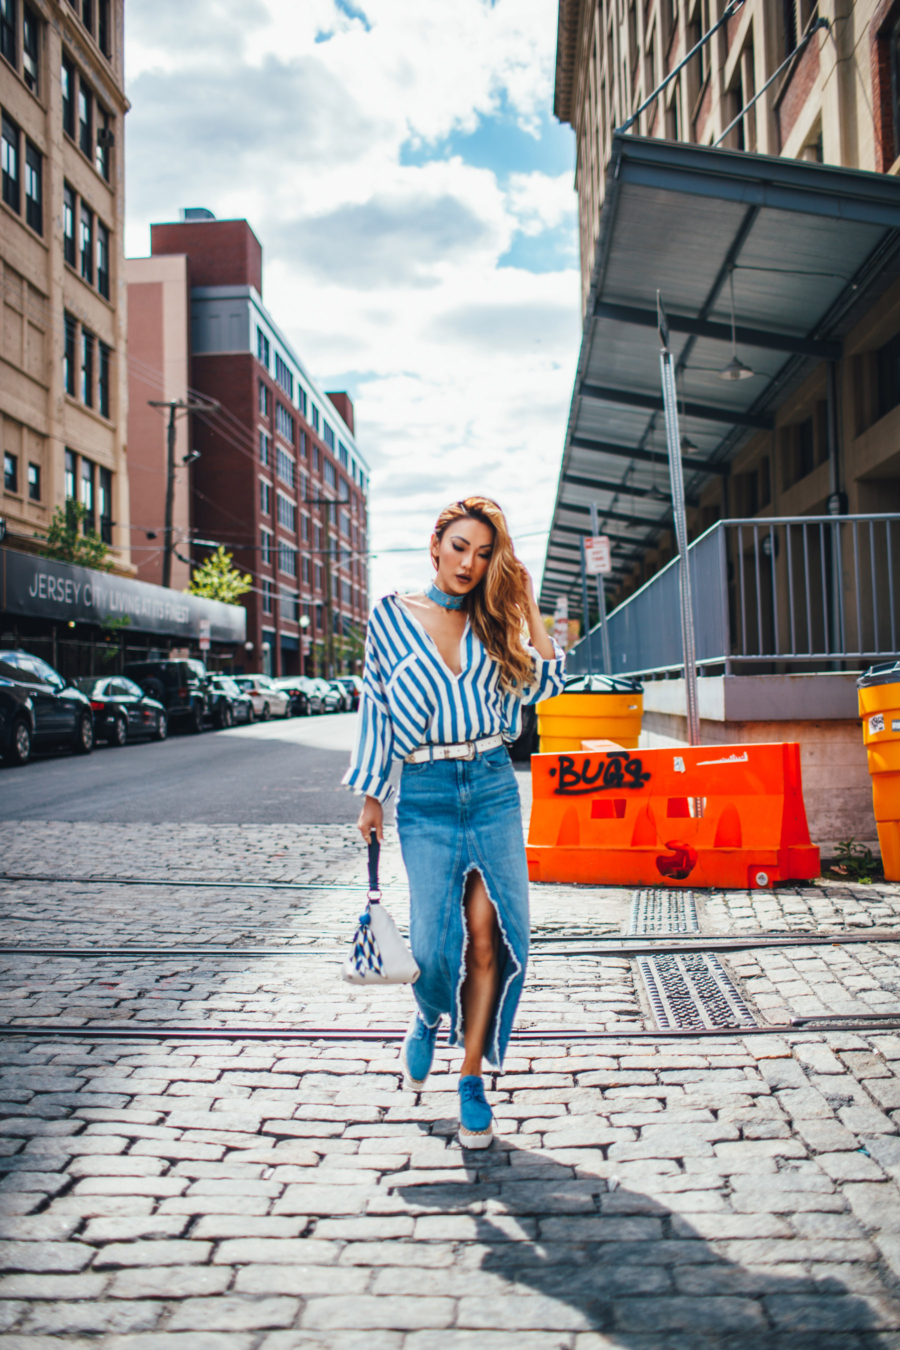 Denim Streetstyle - The Essential Guide to Pulling Off Summer Stripes // NotJessFashion.com